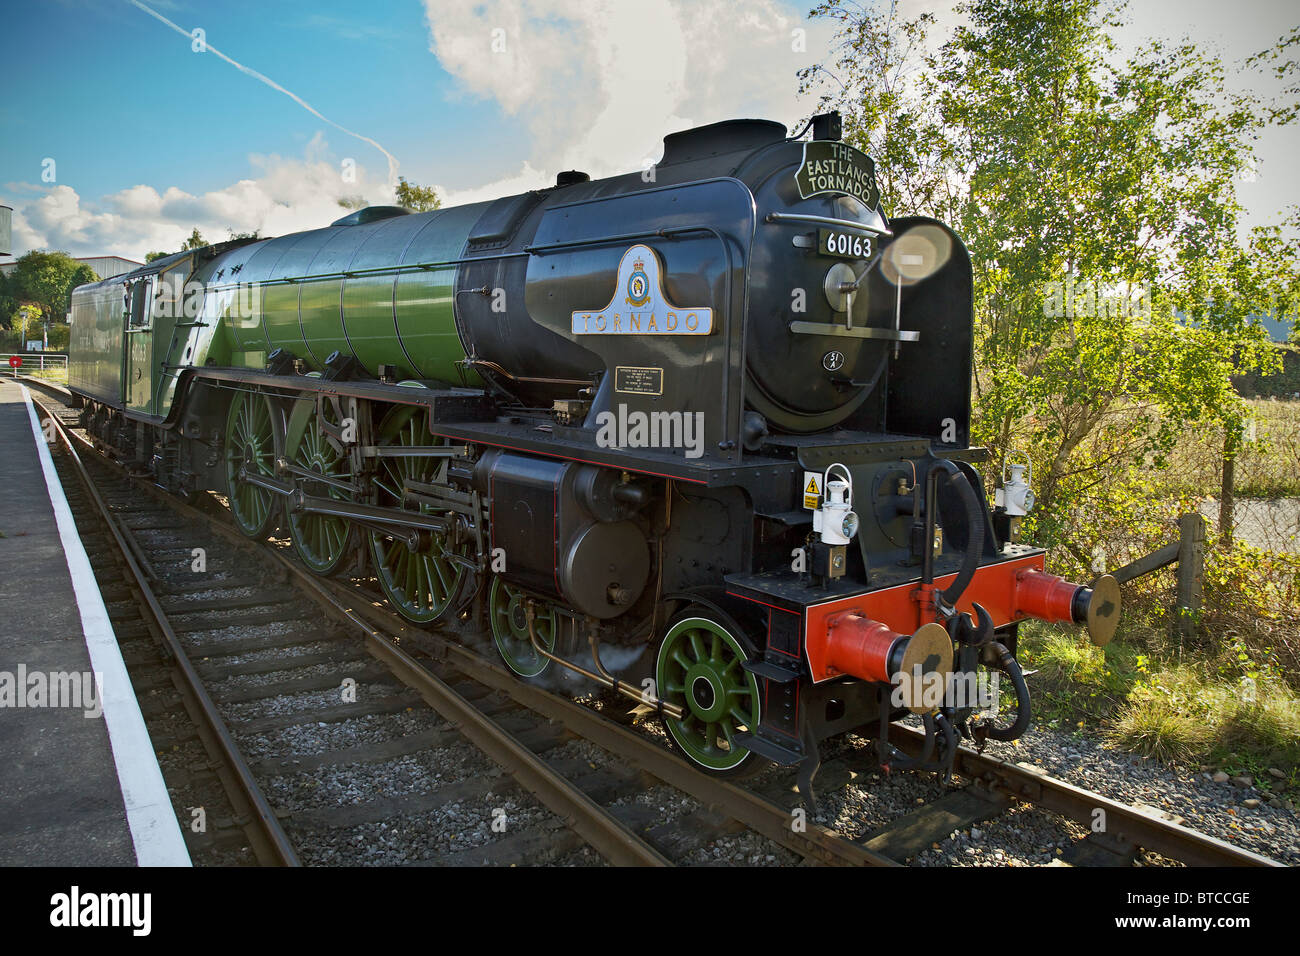 The steam engine Tornado at Heywood station on the East Lancashire Railway. ELR Stock Photo